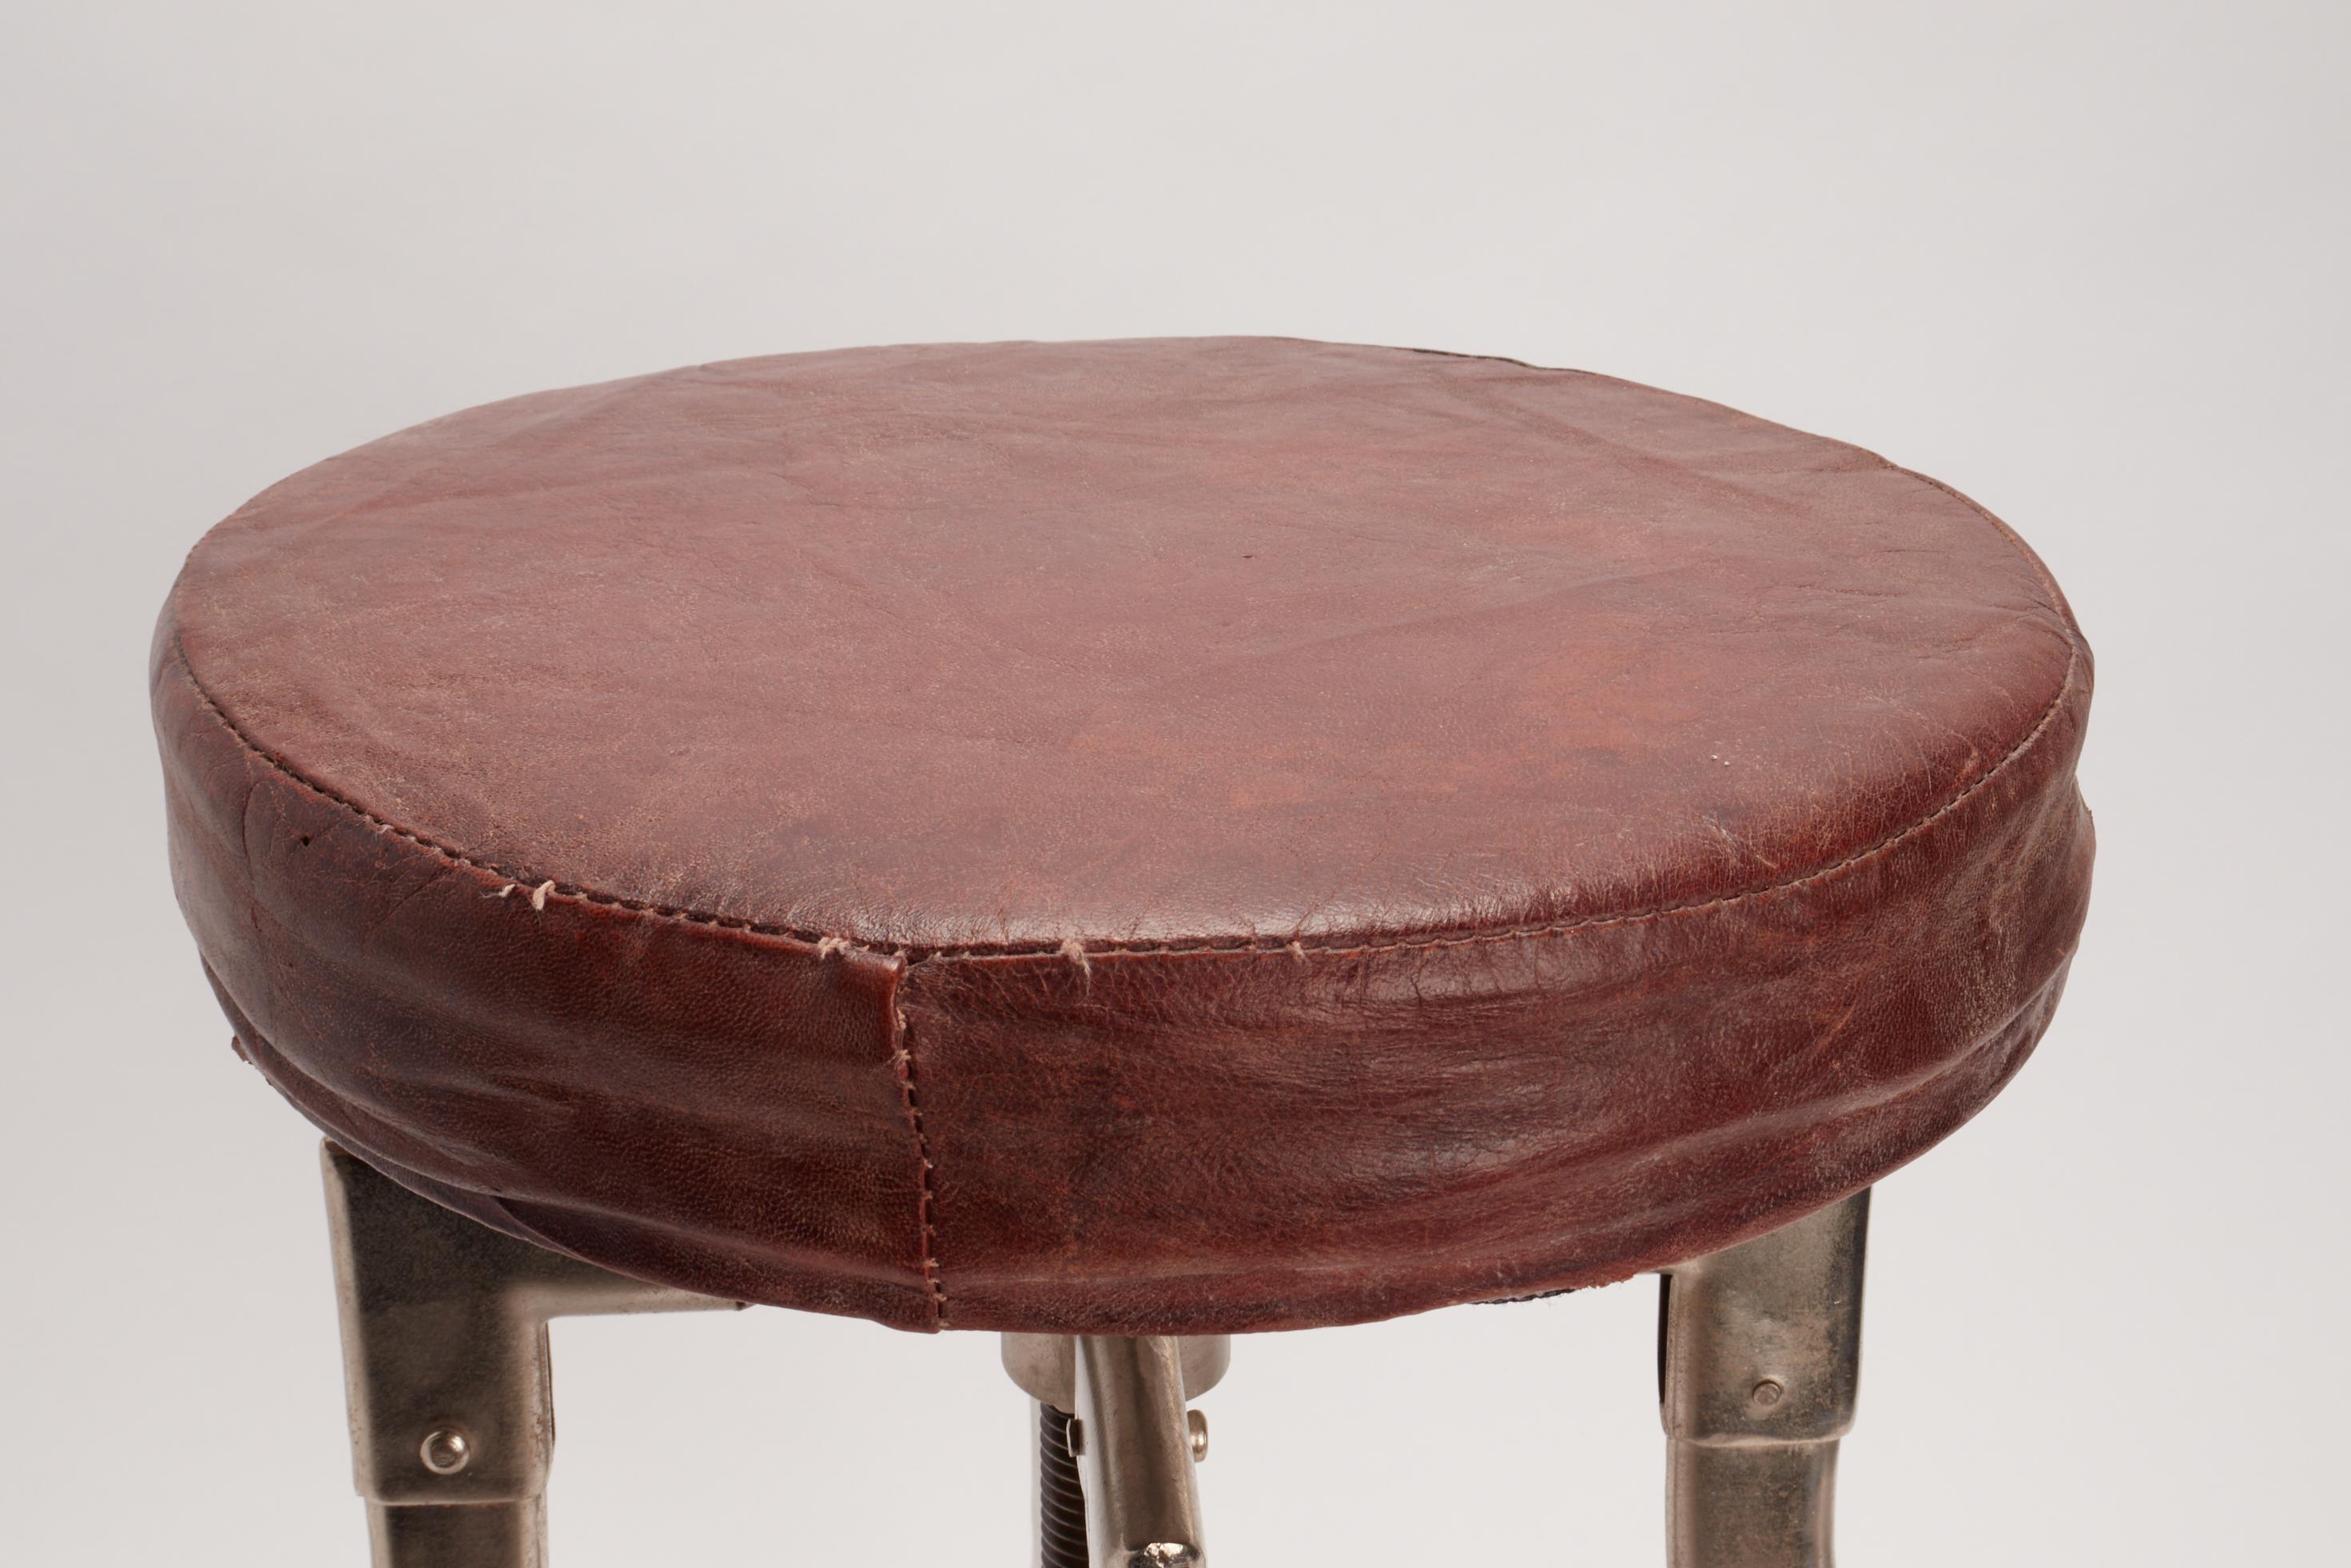 American Chromed Metal Stool with Leather Top, USA, 1930 For Sale